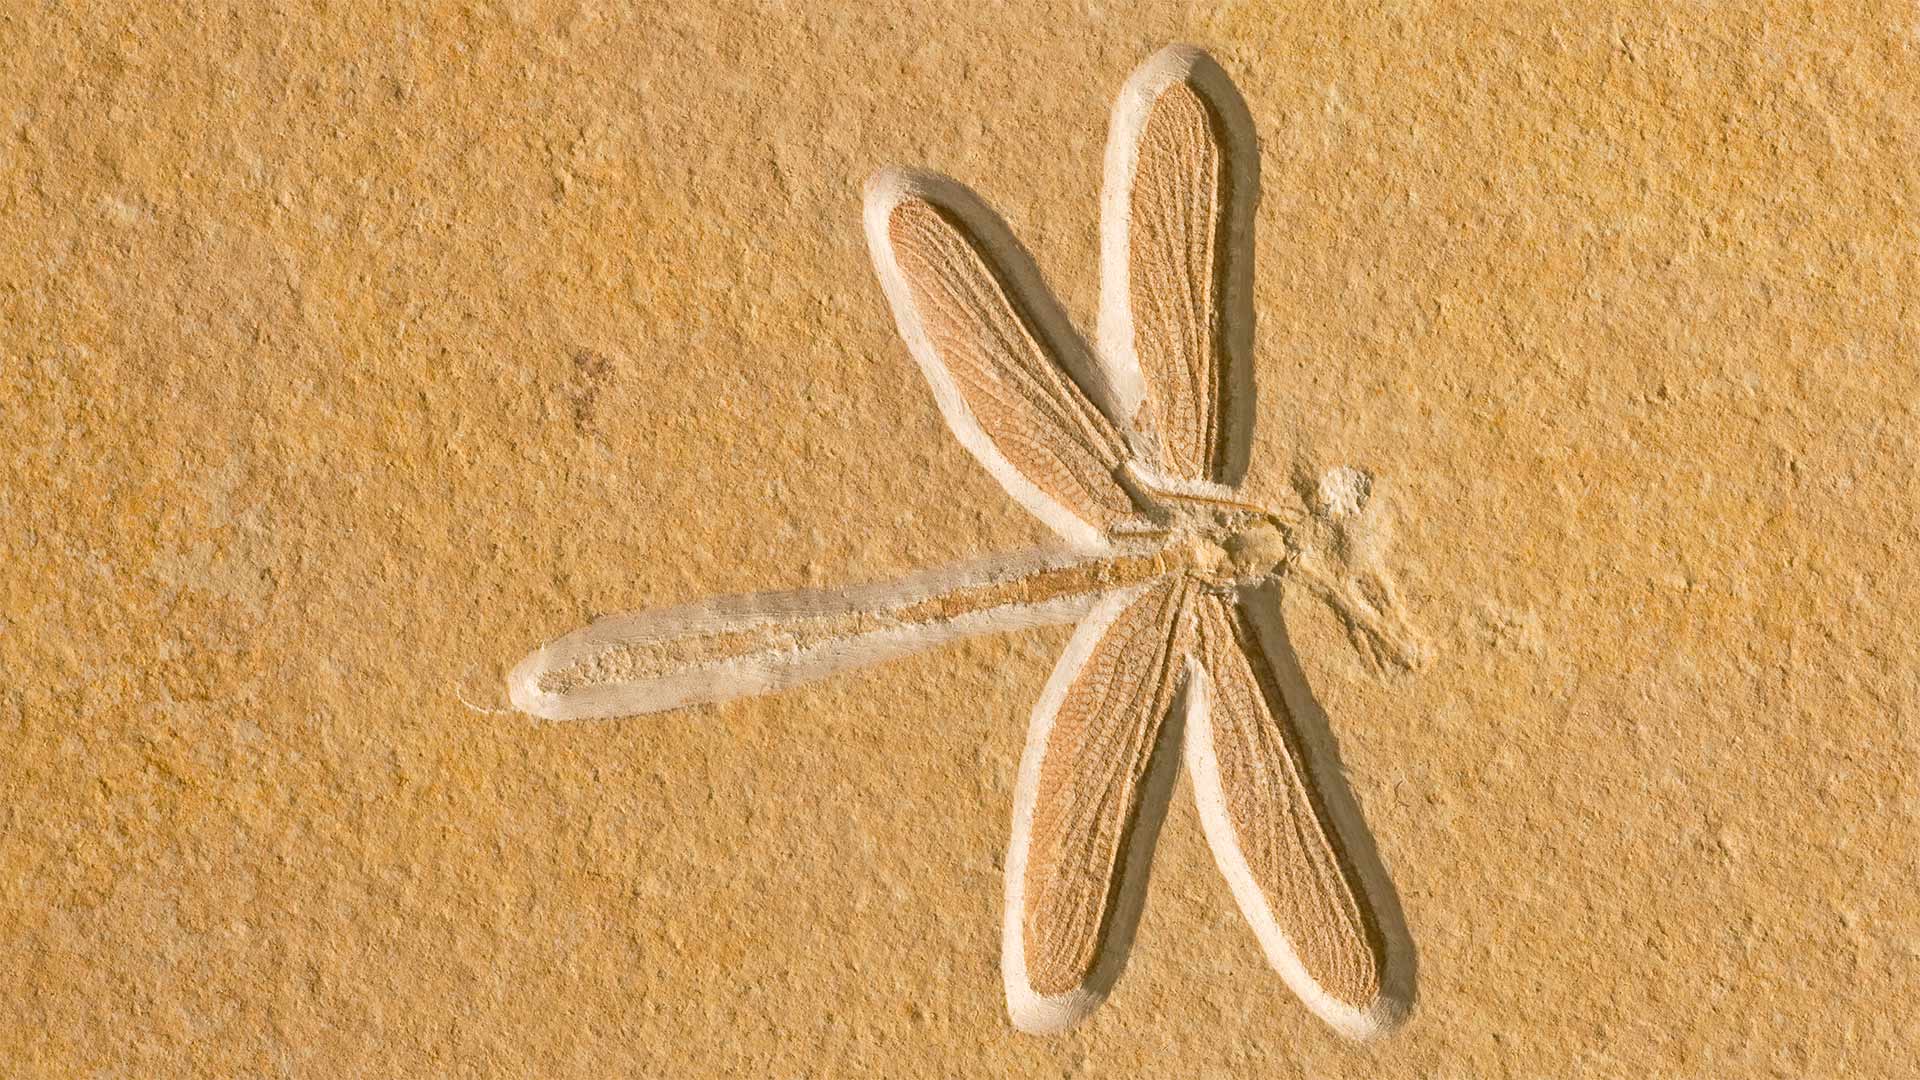 Dragonfly fossil, about 150 million years old, in Solnhofen, Bavaria, Germany - Ingo Arndt